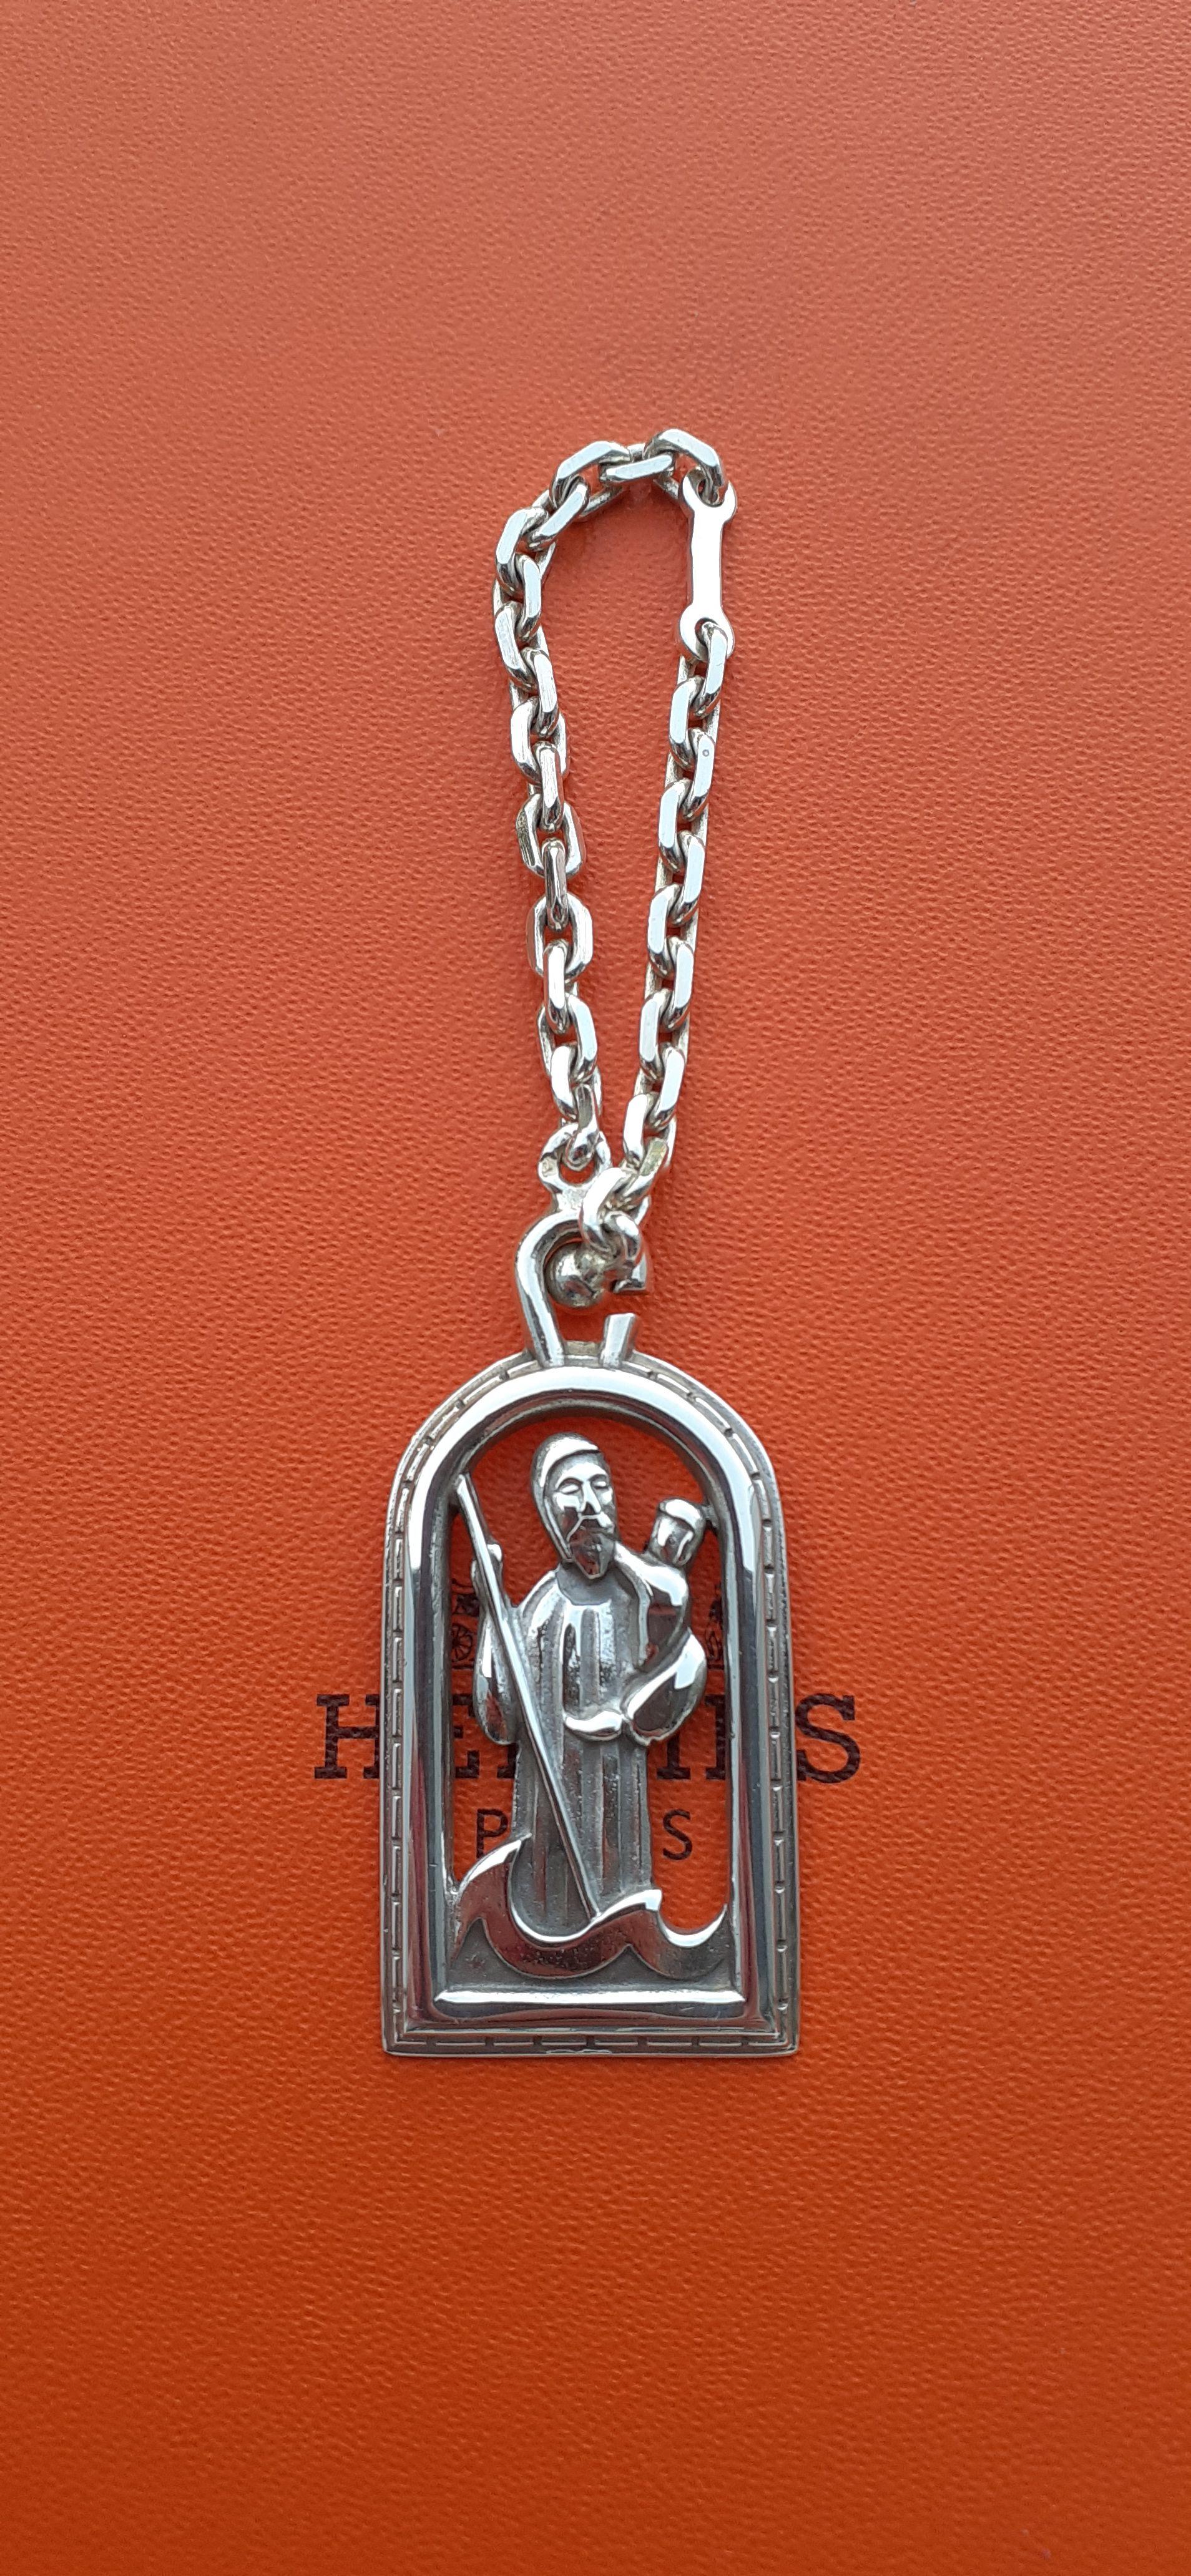 Rare Authentic Hermès Keychain

Represents Saint Christopher, a saint of Christianity. Christophe means 